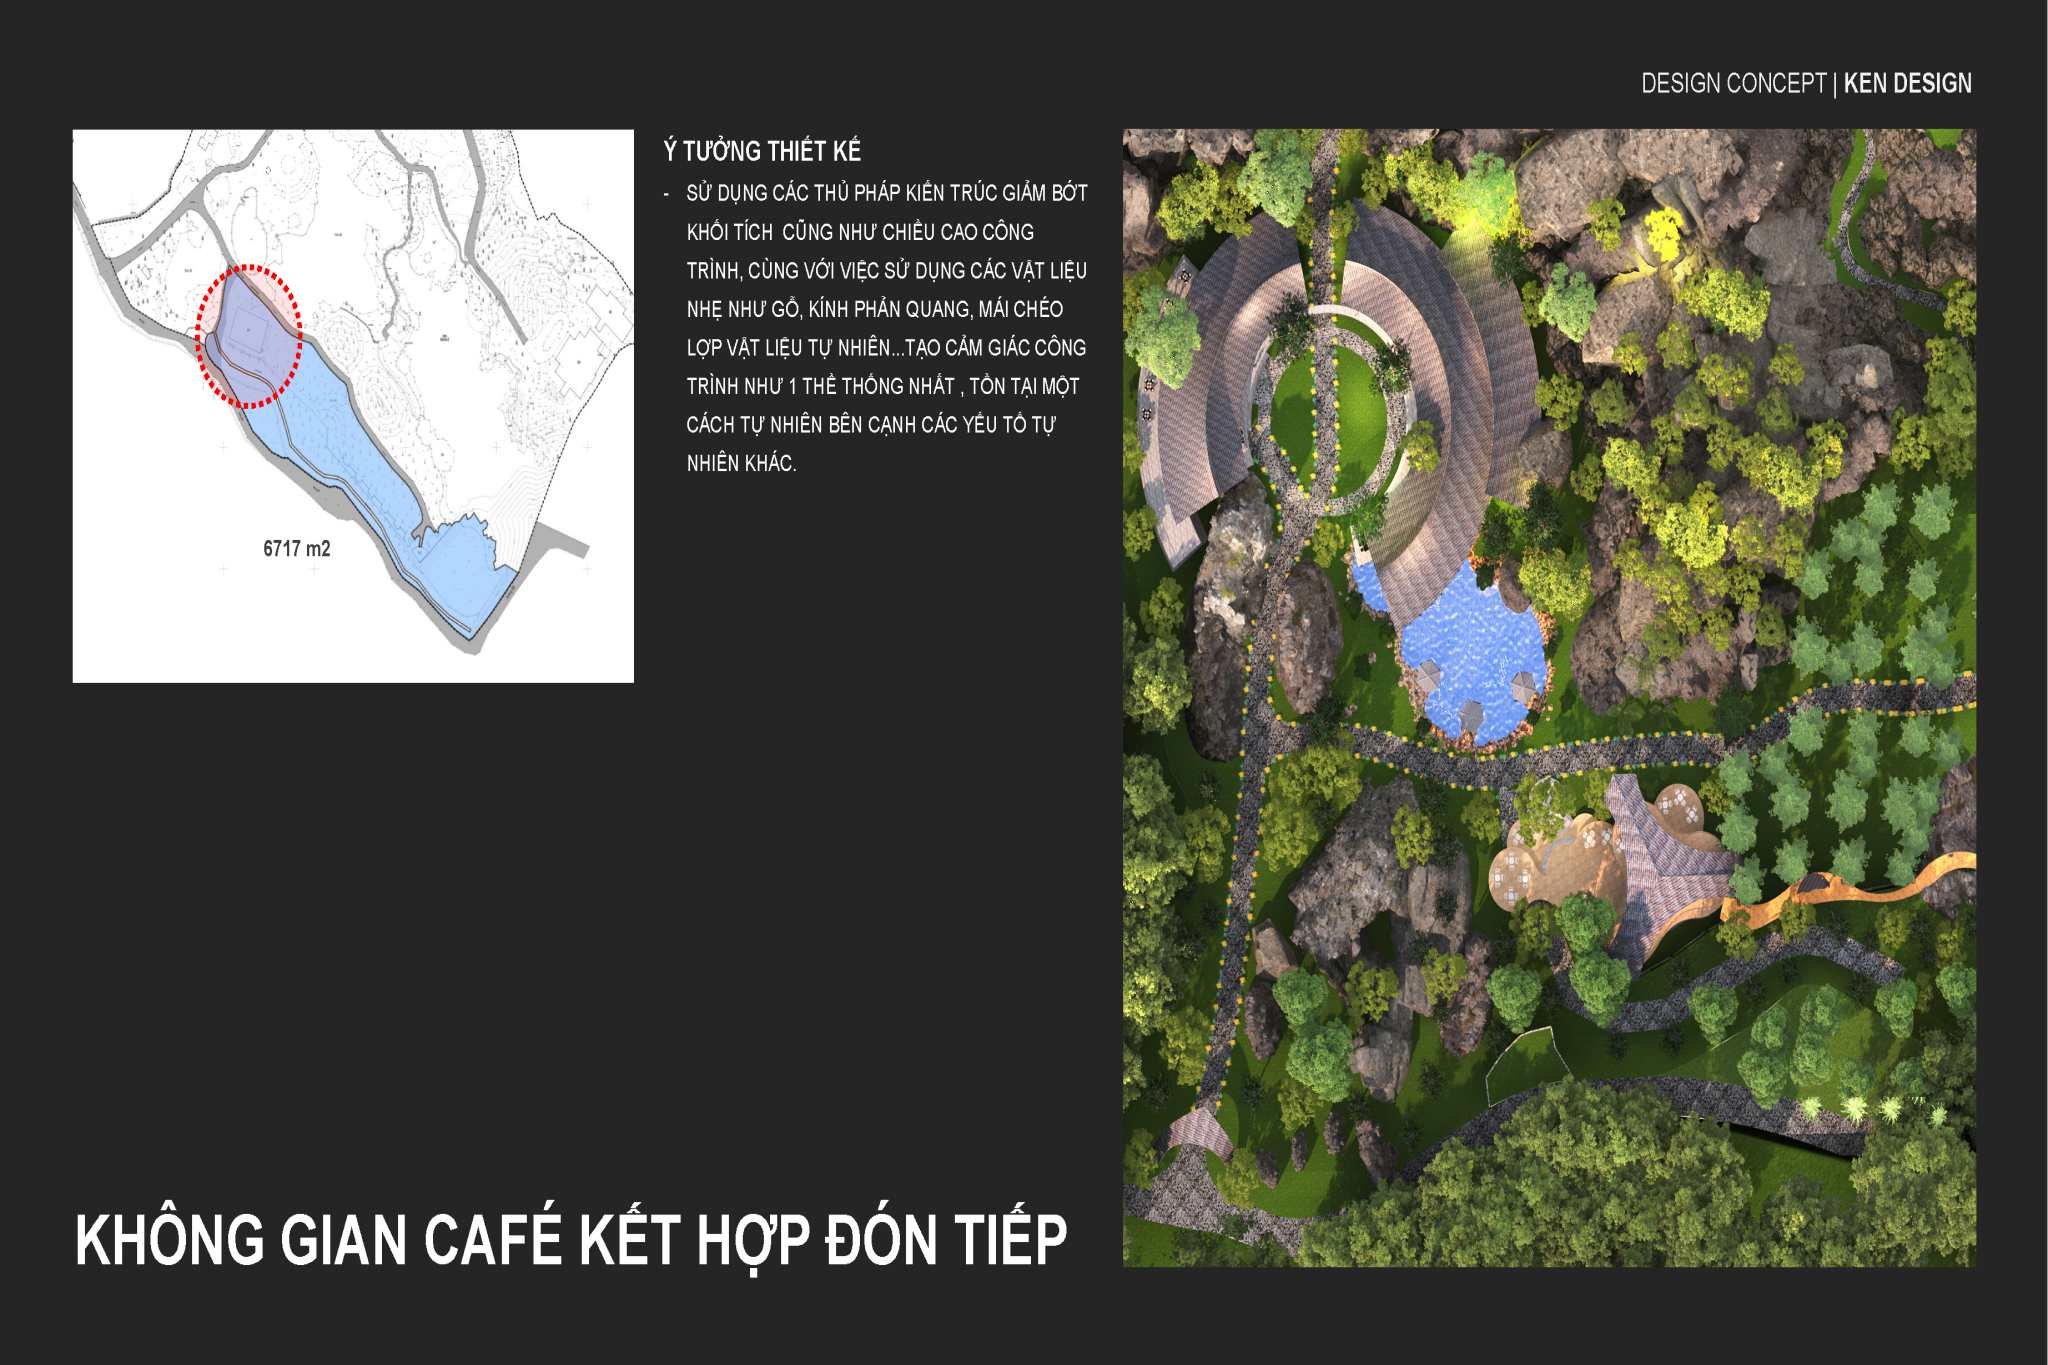 Design of a cafe in the Lam Son